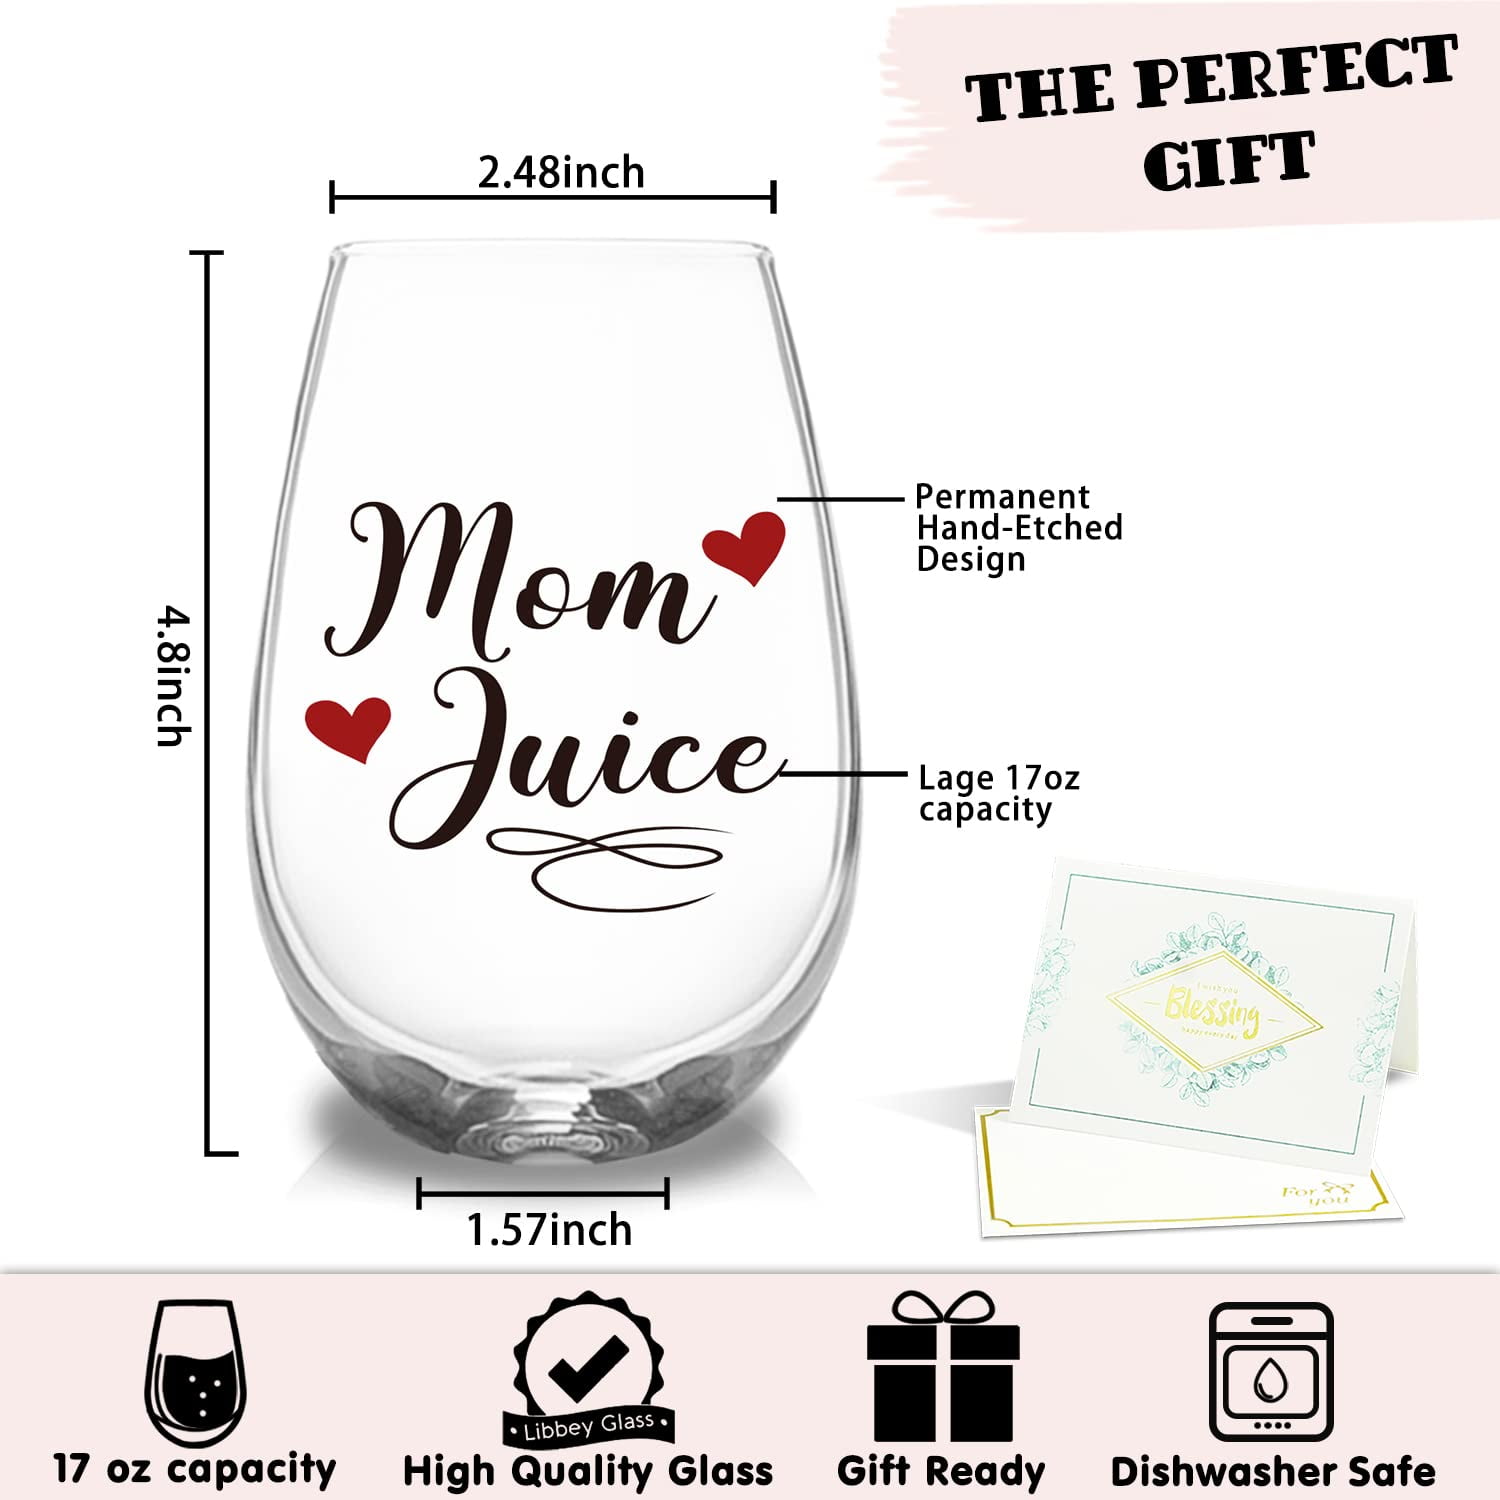 Wine Glasses With Sayings Funny Mom Gifts Mom Gifts Funny Wine Glasses  Gifts for Mom Birthday Mommy Gifts Wine Gifts 